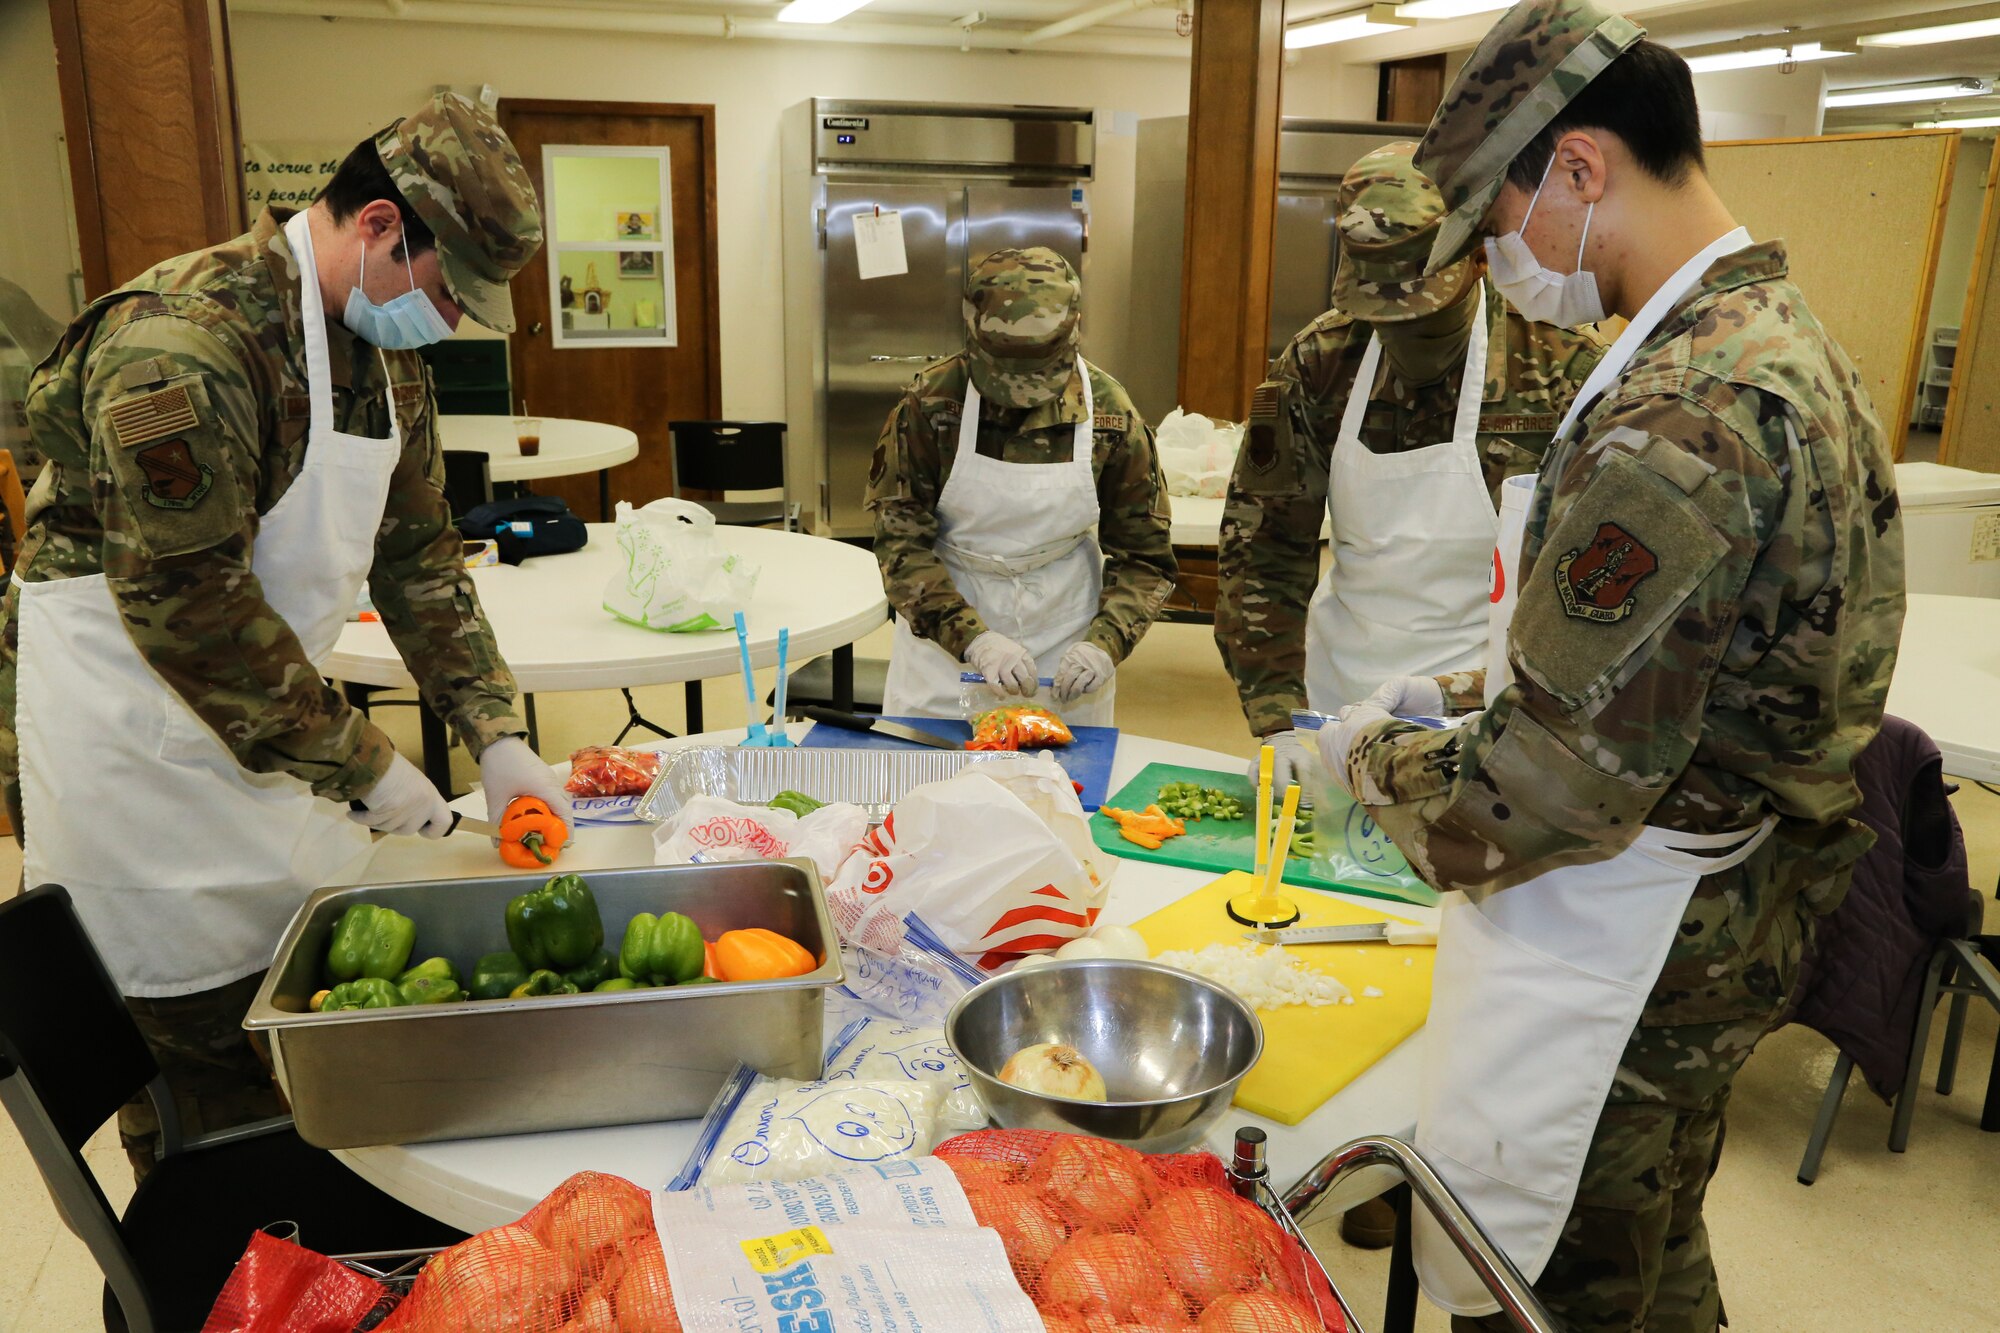 From left to right, Alaska Air National Guard Tech Sgt. Brayden Van Bevera, Airman 1st Class Fionna Kelty, Tech Sgt. Allen Wilson and Senior Airman Alex Choi, all members of the 176th Force Support Flight Sustainment Services, cut fresh produce at the Five Loaves, Two Fish Kitchen in Wasilla, Alaska, Sept. 25, 2020. The Airmen have been volunteering at the kitchen since mid-August, preparing an average of 150 meals per week for non-profit organizations.